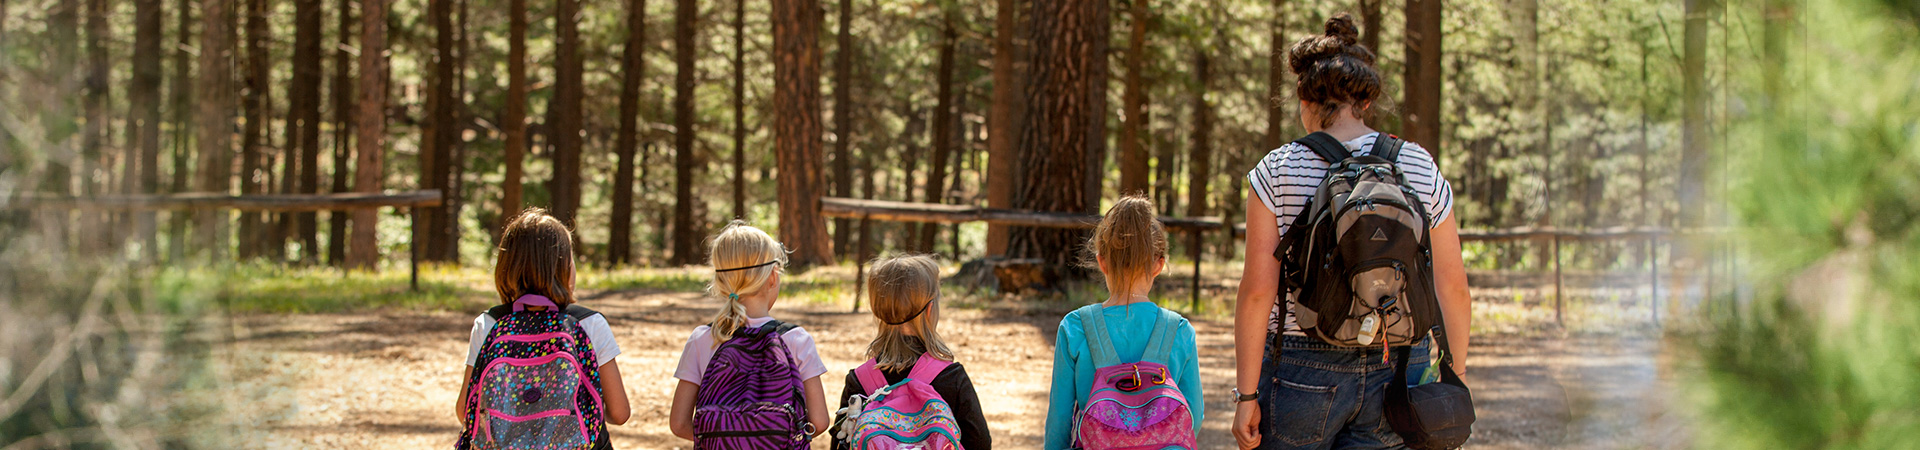  group of young girl scouts with an older adult volunteer hiking through woods 